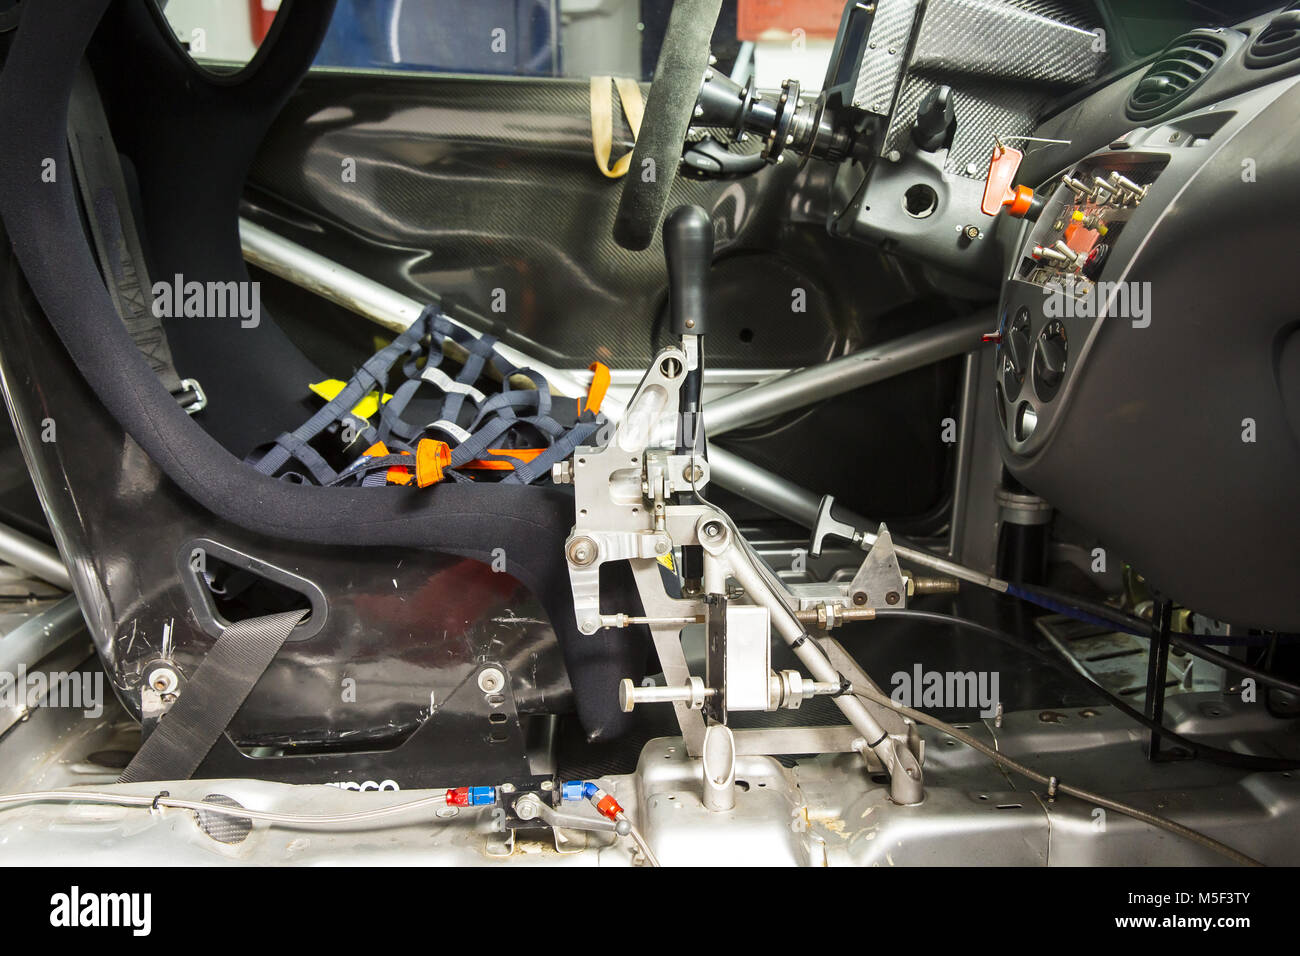 Interior Of A Racing Car With Roll Cage Stock Photo Alamy